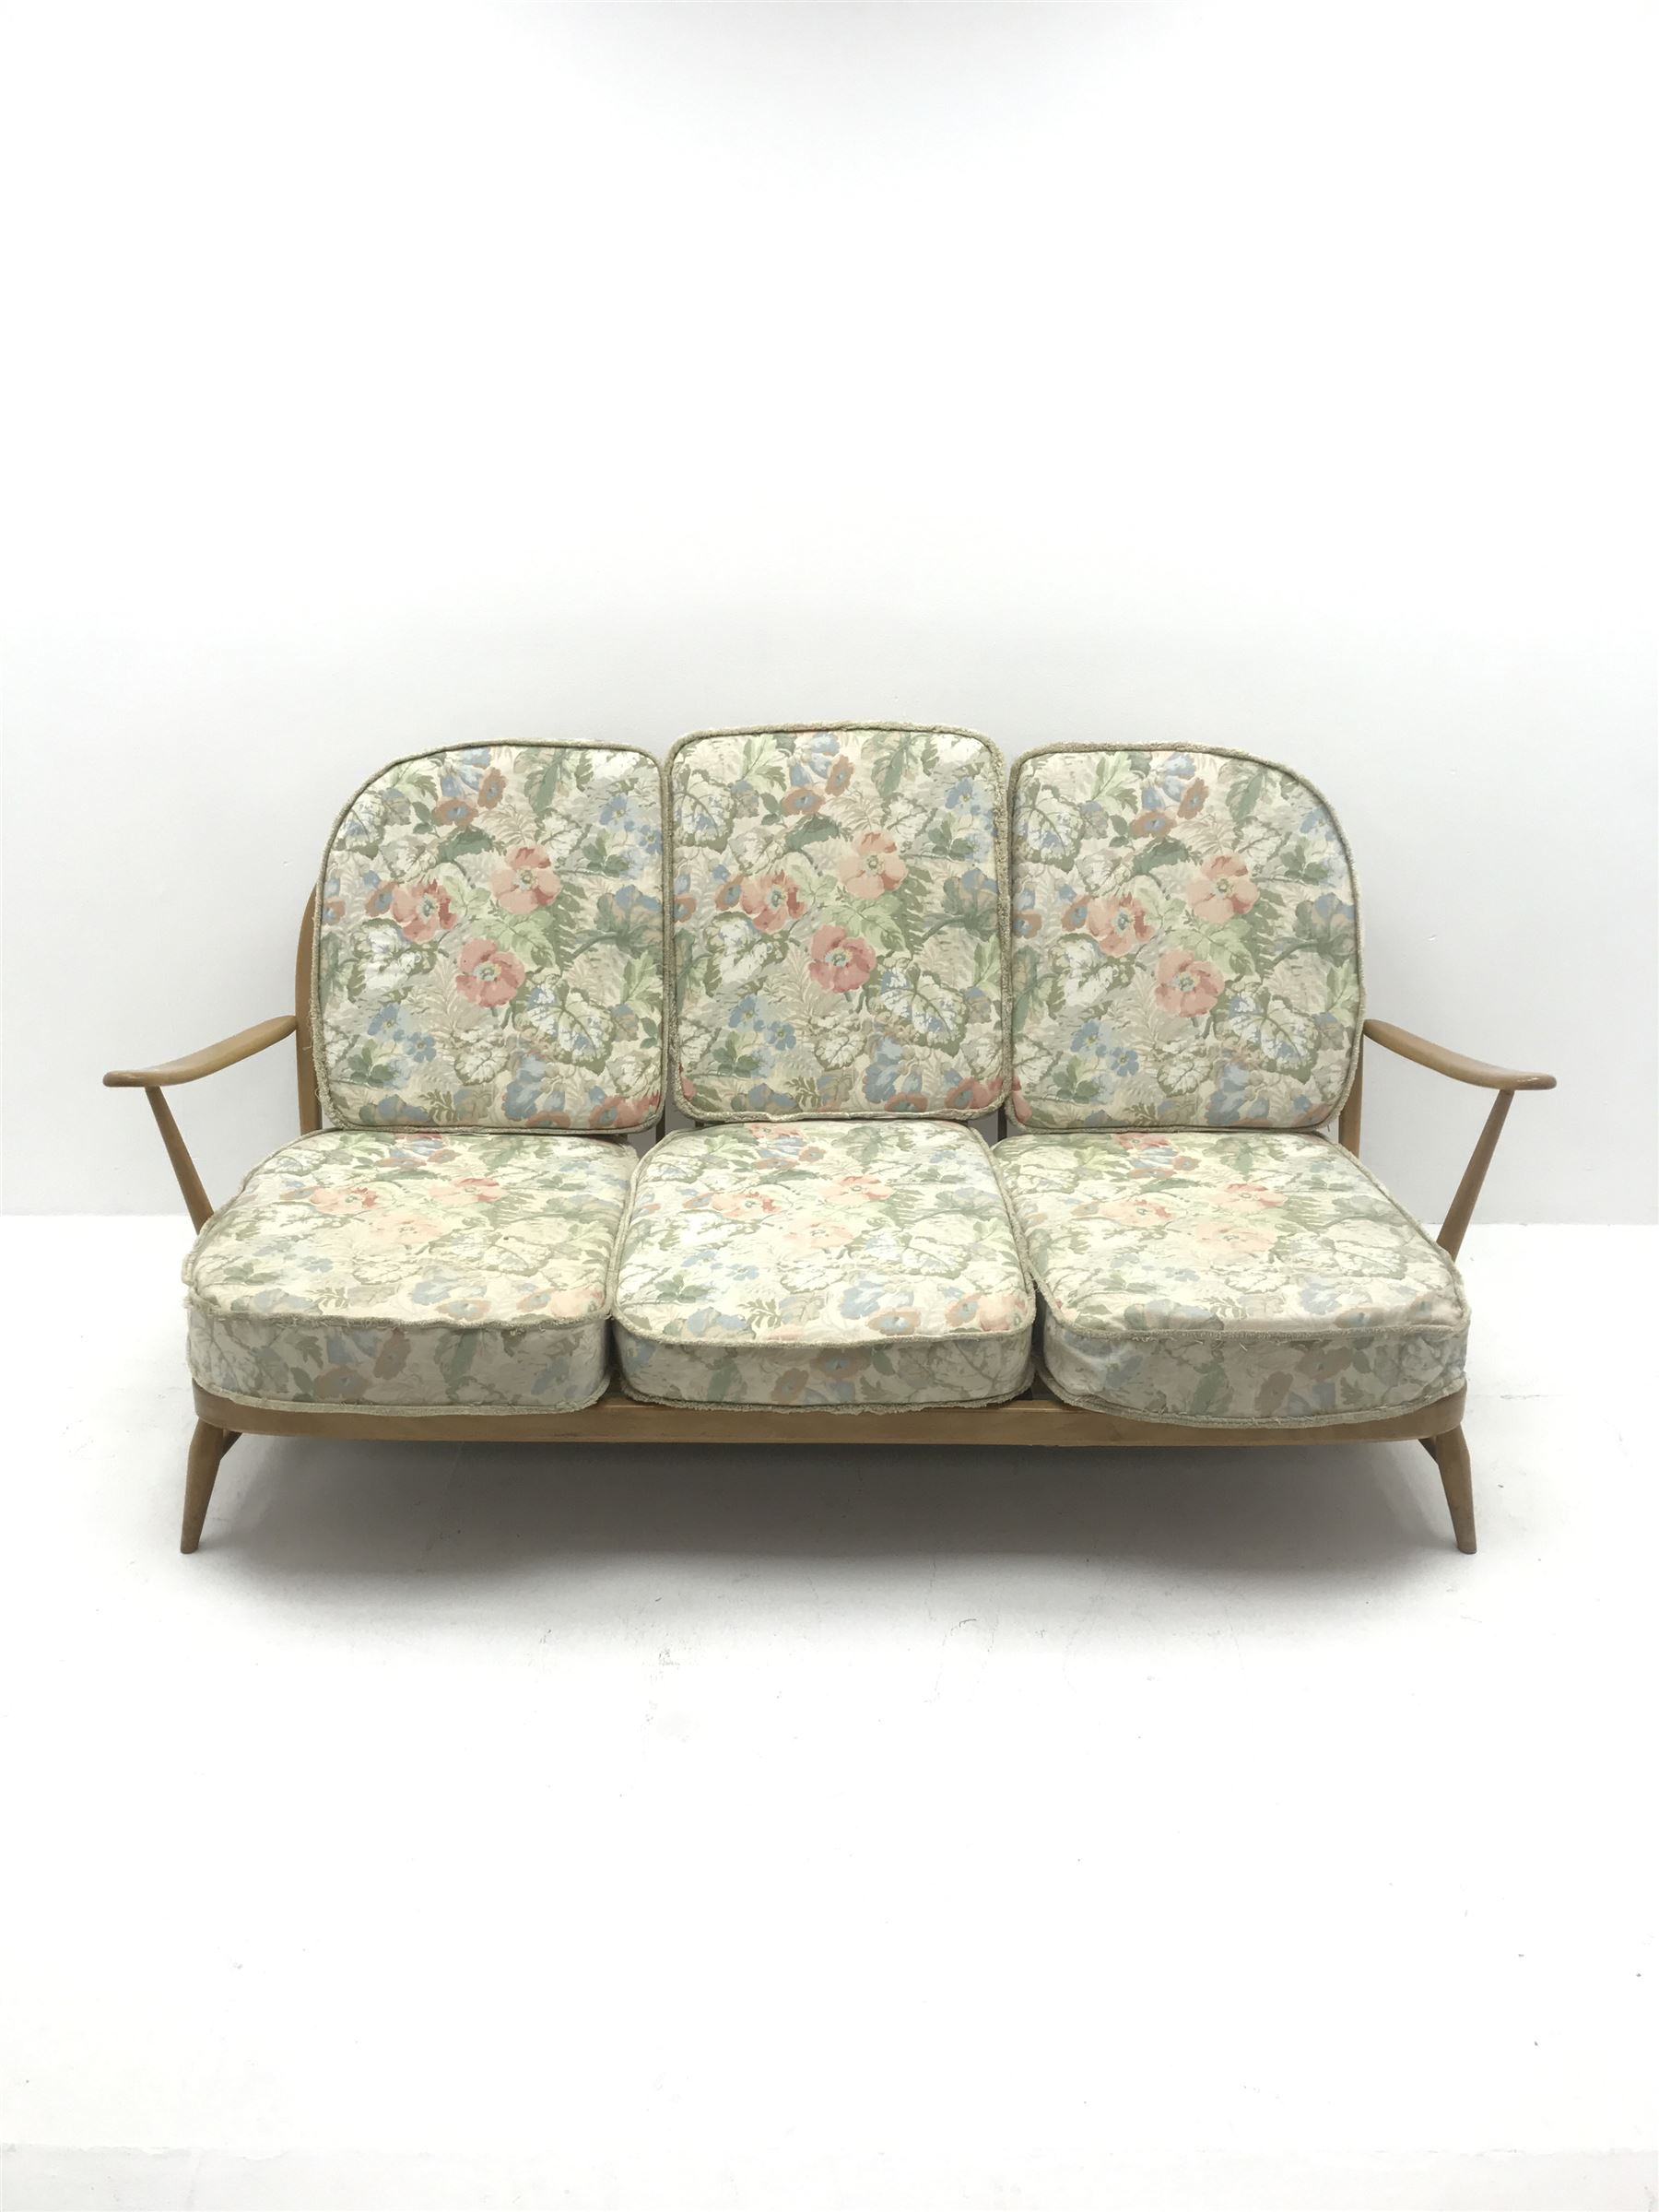 Ercol beech framed two seat sofa - Image 2 of 3